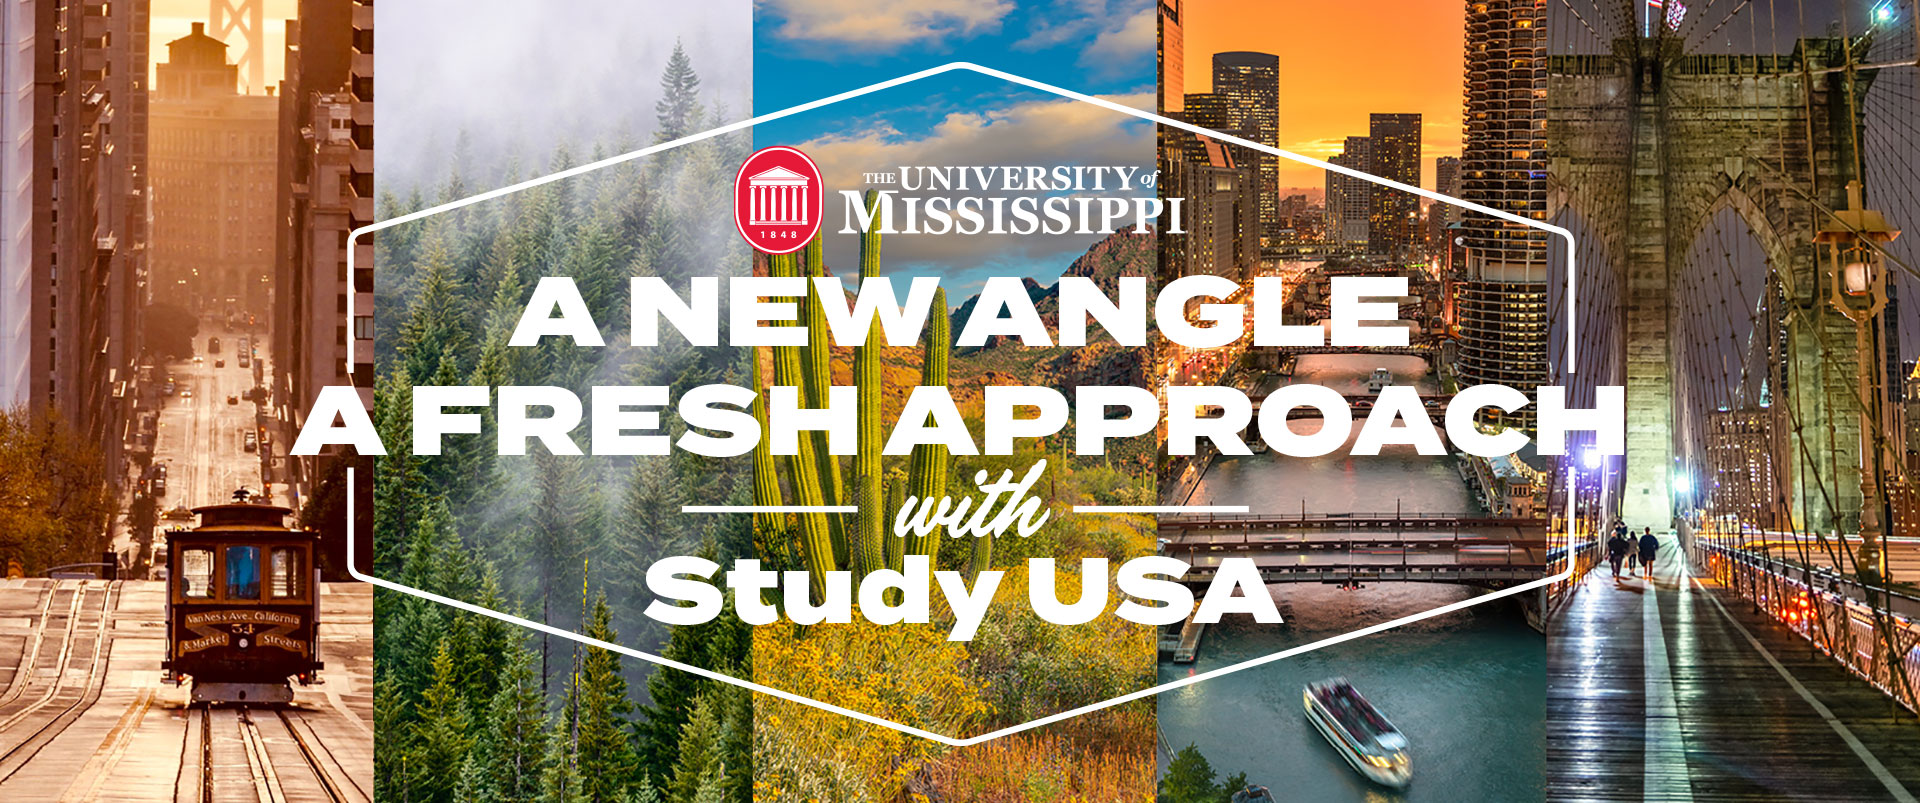 A New Angle, A Fresh Approach with Study USA